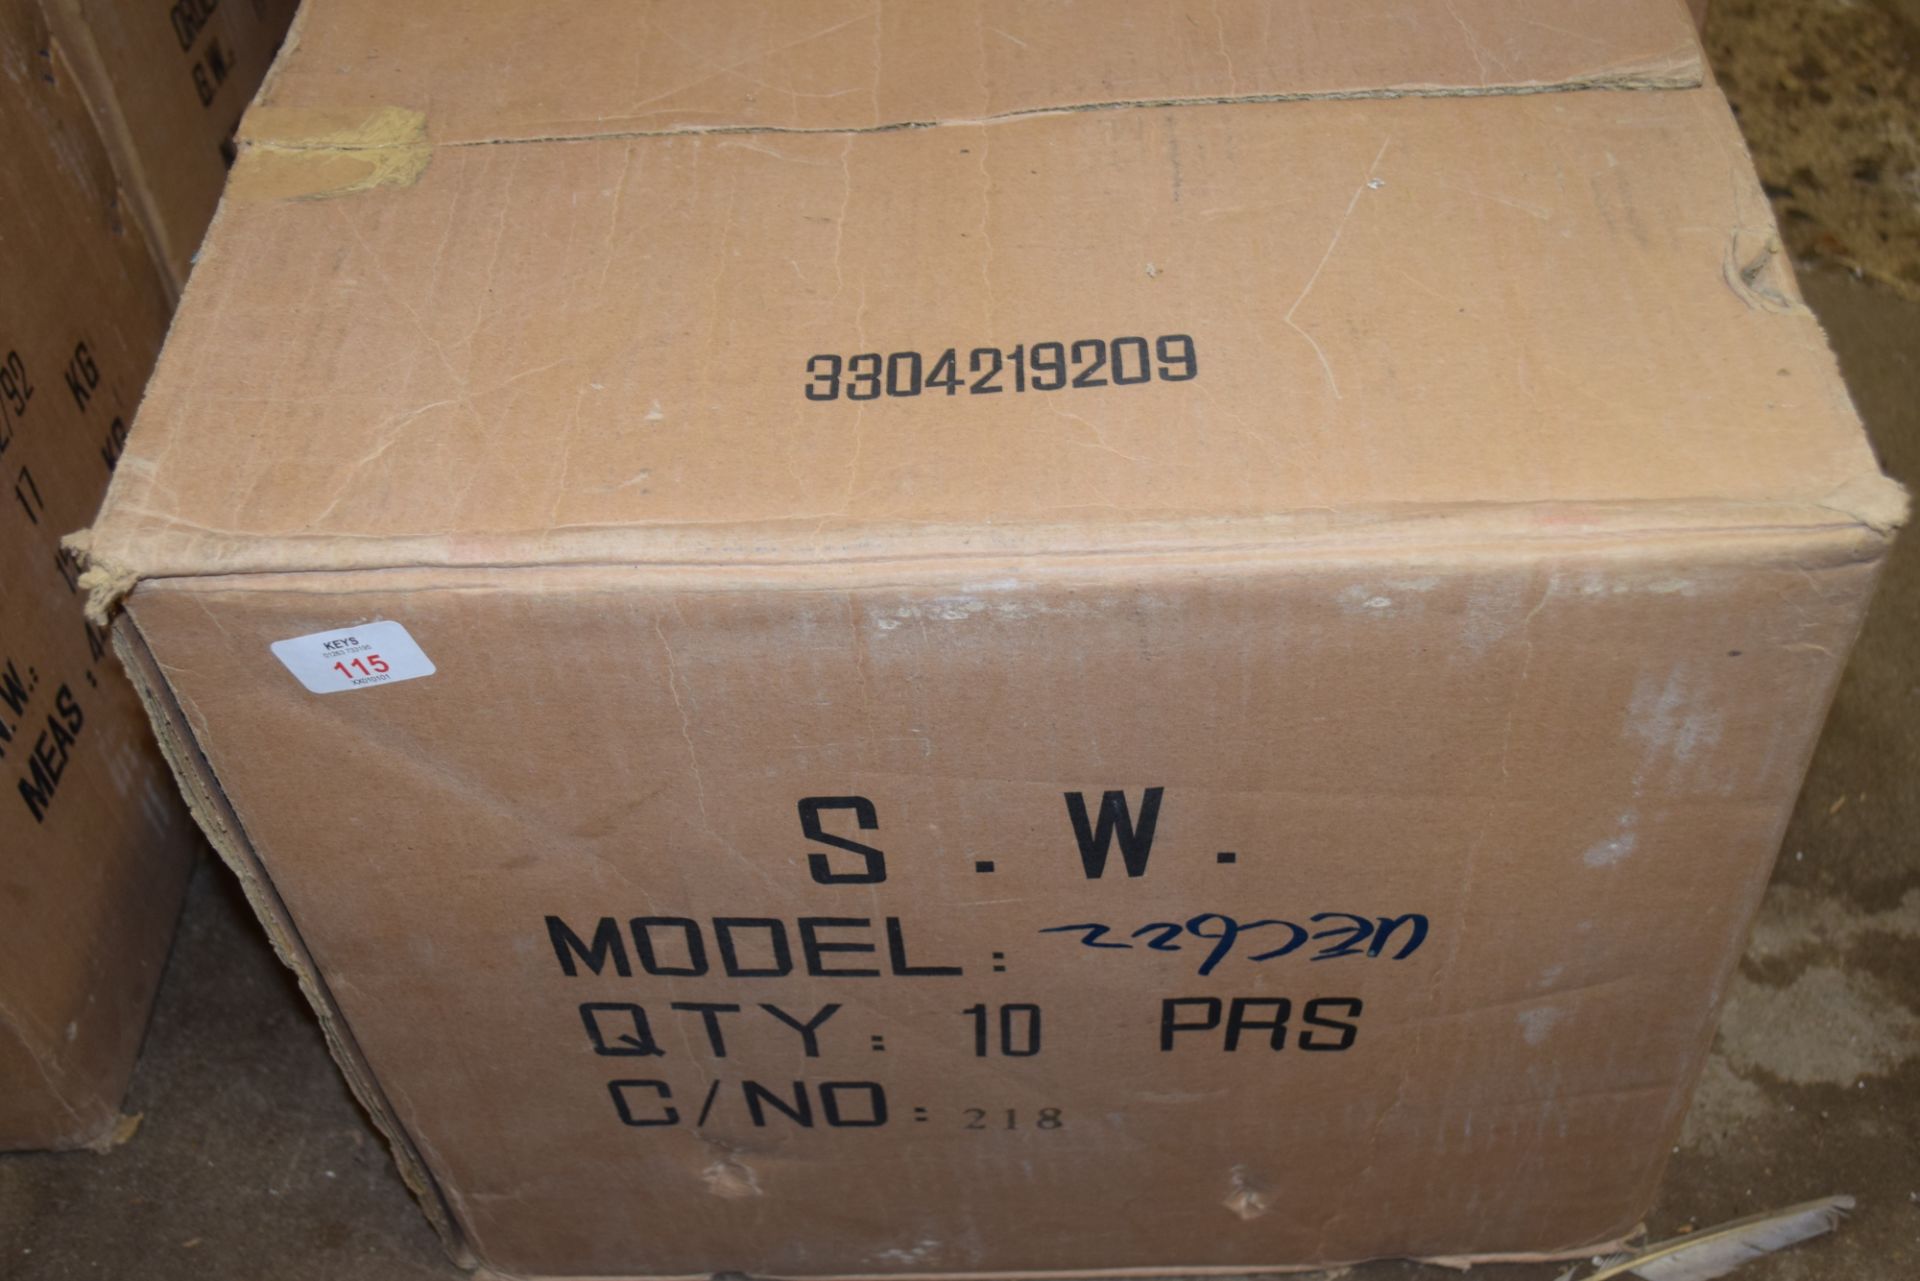 BOX CONTAINING 10 PAIRS OF HI TECH STEREO CAR SPEAKERS, MODEL NO 2C160, SIZE 6 1/2 INCH, POWER - Image 4 of 4